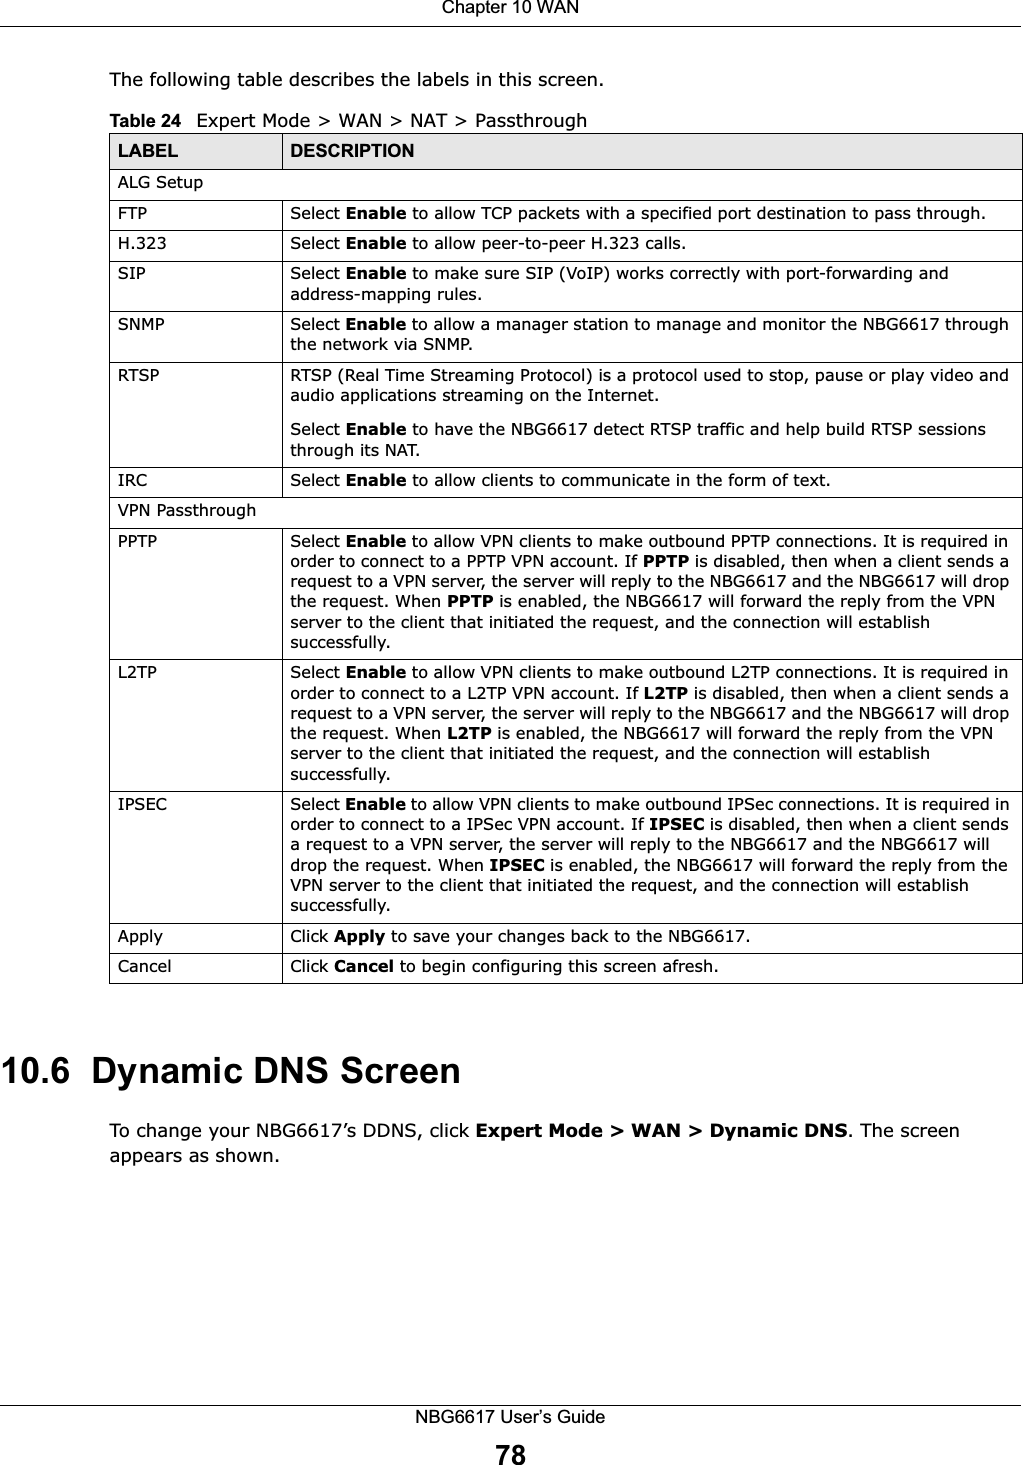 Chapter 10 WANNBG6617 User’s Guide78The following table describes the labels in this screen.10.6  Dynamic DNS ScreenTo change your NBG6617’s DDNS, click Expert Mode &gt; WAN &gt; Dynamic DNS. The screen appears as shown.Table 24   Expert Mode &gt; WAN &gt; NAT &gt; PassthroughLABEL DESCRIPTIONALG SetupFTP Select Enable to allow TCP packets with a specified port destination to pass through.H.323 Select Enable to allow peer-to-peer H.323 calls.SIP Select Enable to make sure SIP (VoIP) works correctly with port-forwarding and address-mapping rules.SNMP Select Enable to allow a manager station to manage and monitor the NBG6617 through the network via SNMP. RTSP RTSP (Real Time Streaming Protocol) is a protocol used to stop, pause or play video and audio applications streaming on the Internet.Select Enable to have the NBG6617 detect RTSP traffic and help build RTSP sessions through its NAT.IRC Select Enable to allow clients to communicate in the form of text.VPN Passthrough PPTP Select Enable to allow VPN clients to make outbound PPTP connections. It is required in order to connect to a PPTP VPN account. If PPTP is disabled, then when a client sends a request to a VPN server, the server will reply to the NBG6617 and the NBG6617 will drop the request. When PPTP is enabled, the NBG6617 will forward the reply from the VPN server to the client that initiated the request, and the connection will establish successfully.L2TP Select Enable to allow VPN clients to make outbound L2TP connections. It is required in order to connect to a L2TP VPN account. If L2TP is disabled, then when a client sends a request to a VPN server, the server will reply to the NBG6617 and the NBG6617 will drop the request. When L2TP is enabled, the NBG6617 will forward the reply from the VPN server to the client that initiated the request, and the connection will establish successfully.IPSEC Select Enable to allow VPN clients to make outbound IPSec connections. It is required in order to connect to a IPSec VPN account. If IPSEC is disabled, then when a client sends a request to a VPN server, the server will reply to the NBG6617 and the NBG6617 will drop the request. When IPSEC is enabled, the NBG6617 will forward the reply from the VPN server to the client that initiated the request, and the connection will establish successfully.Apply Click Apply to save your changes back to the NBG6617.Cancel Click Cancel to begin configuring this screen afresh.